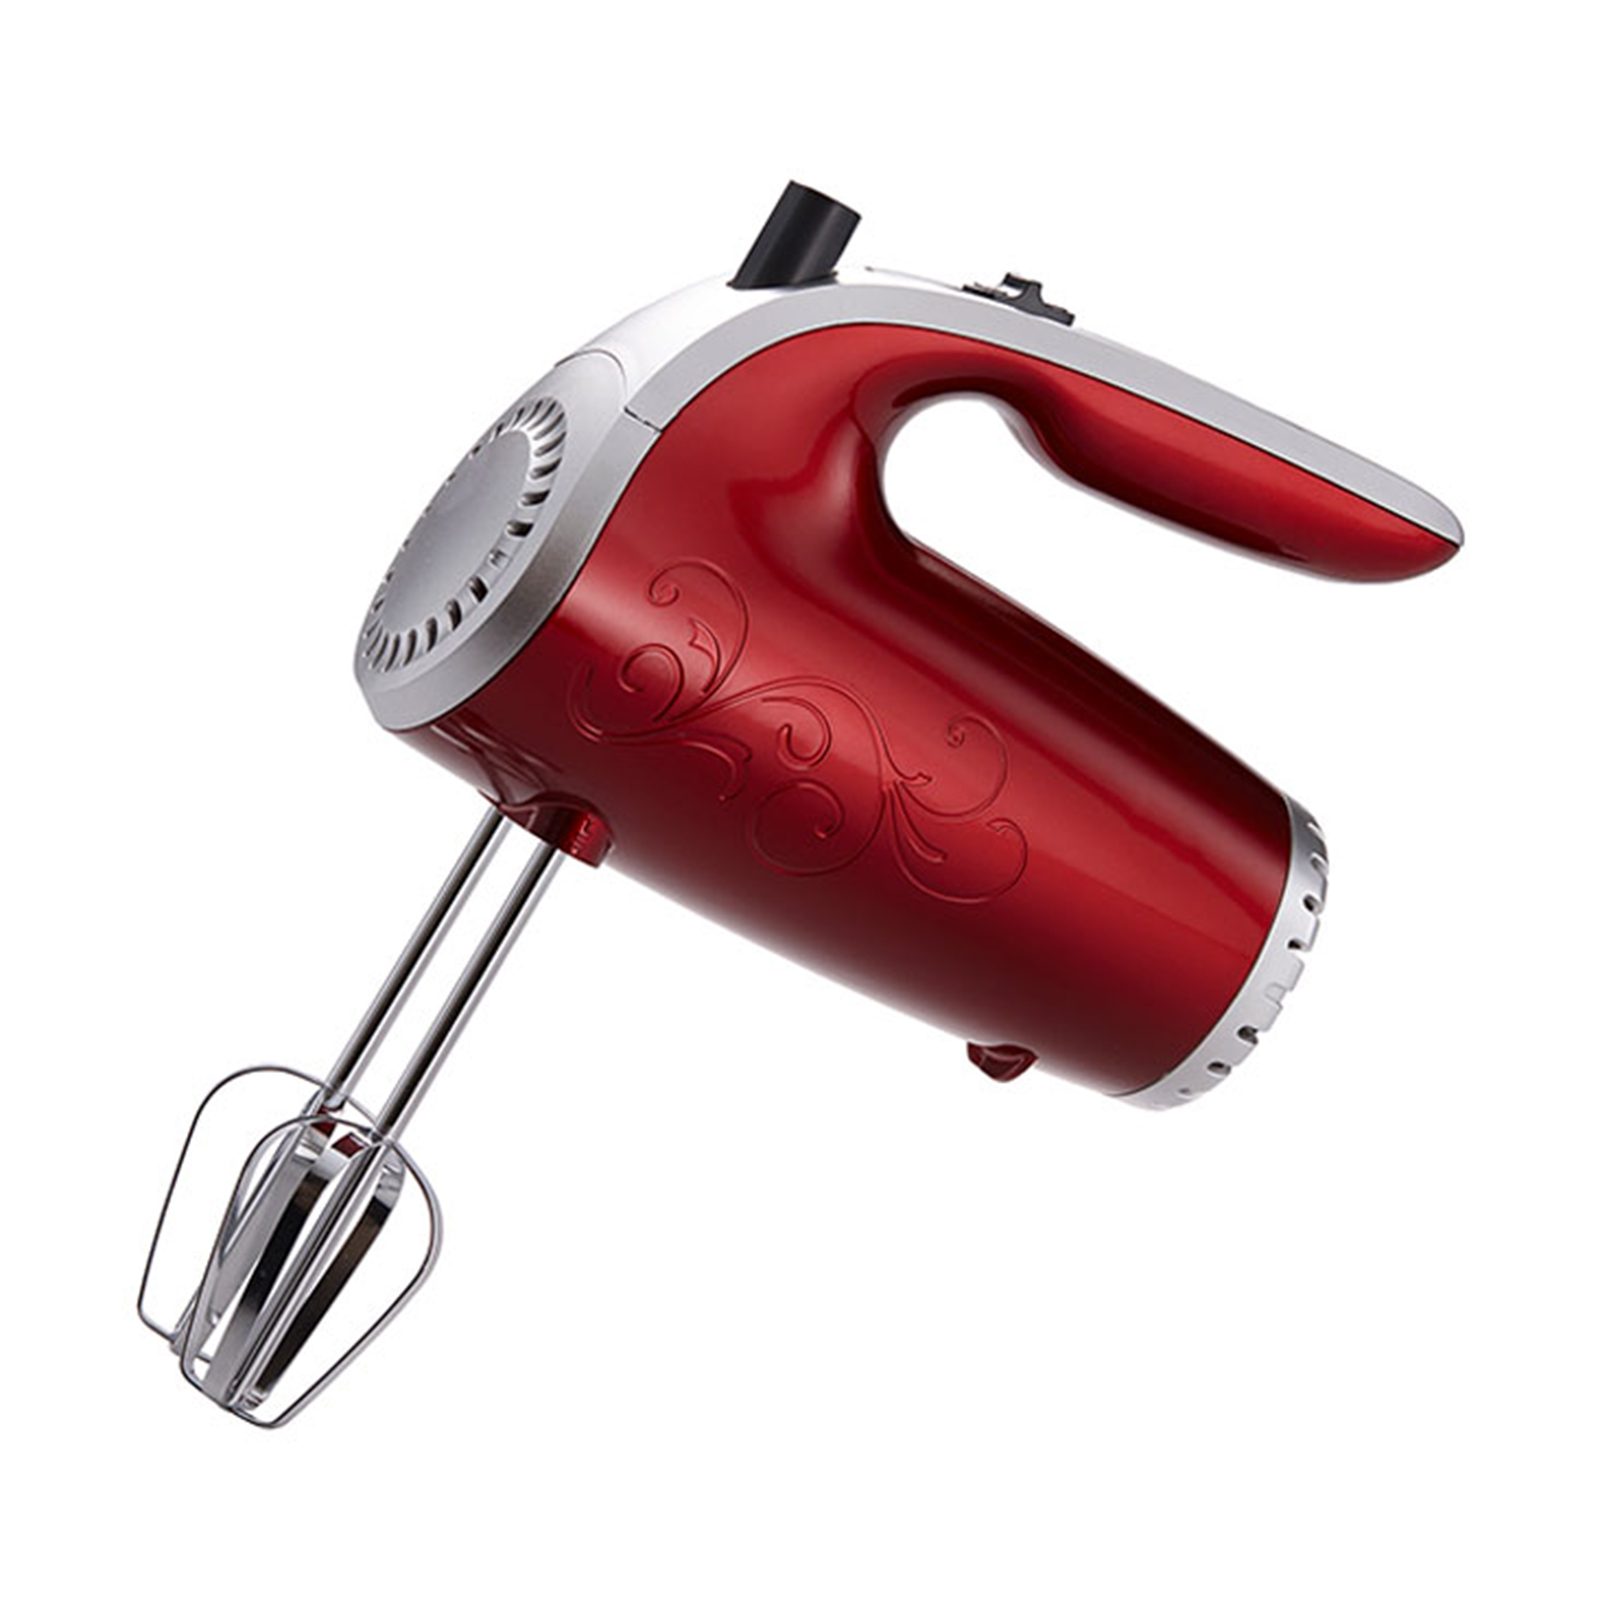 Brentwood 97096390M 5 Speed Hand Mixer- Red